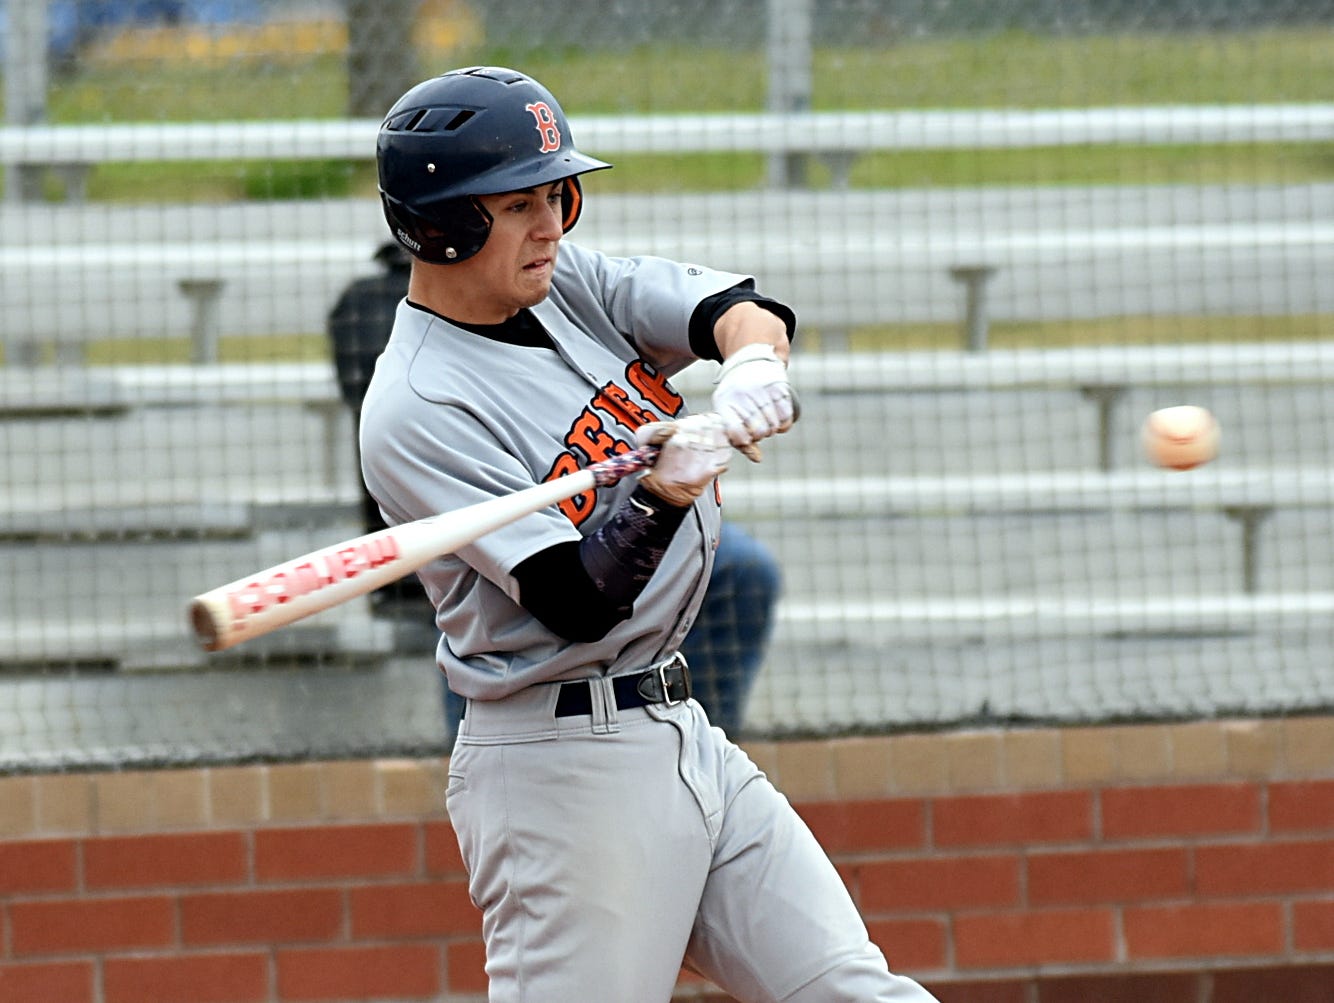 Senior Isaac Robertson was one of two Beech High baseball players to produce four hits in Thursday evening’s 15-7 victory over visiting Hendersonville.